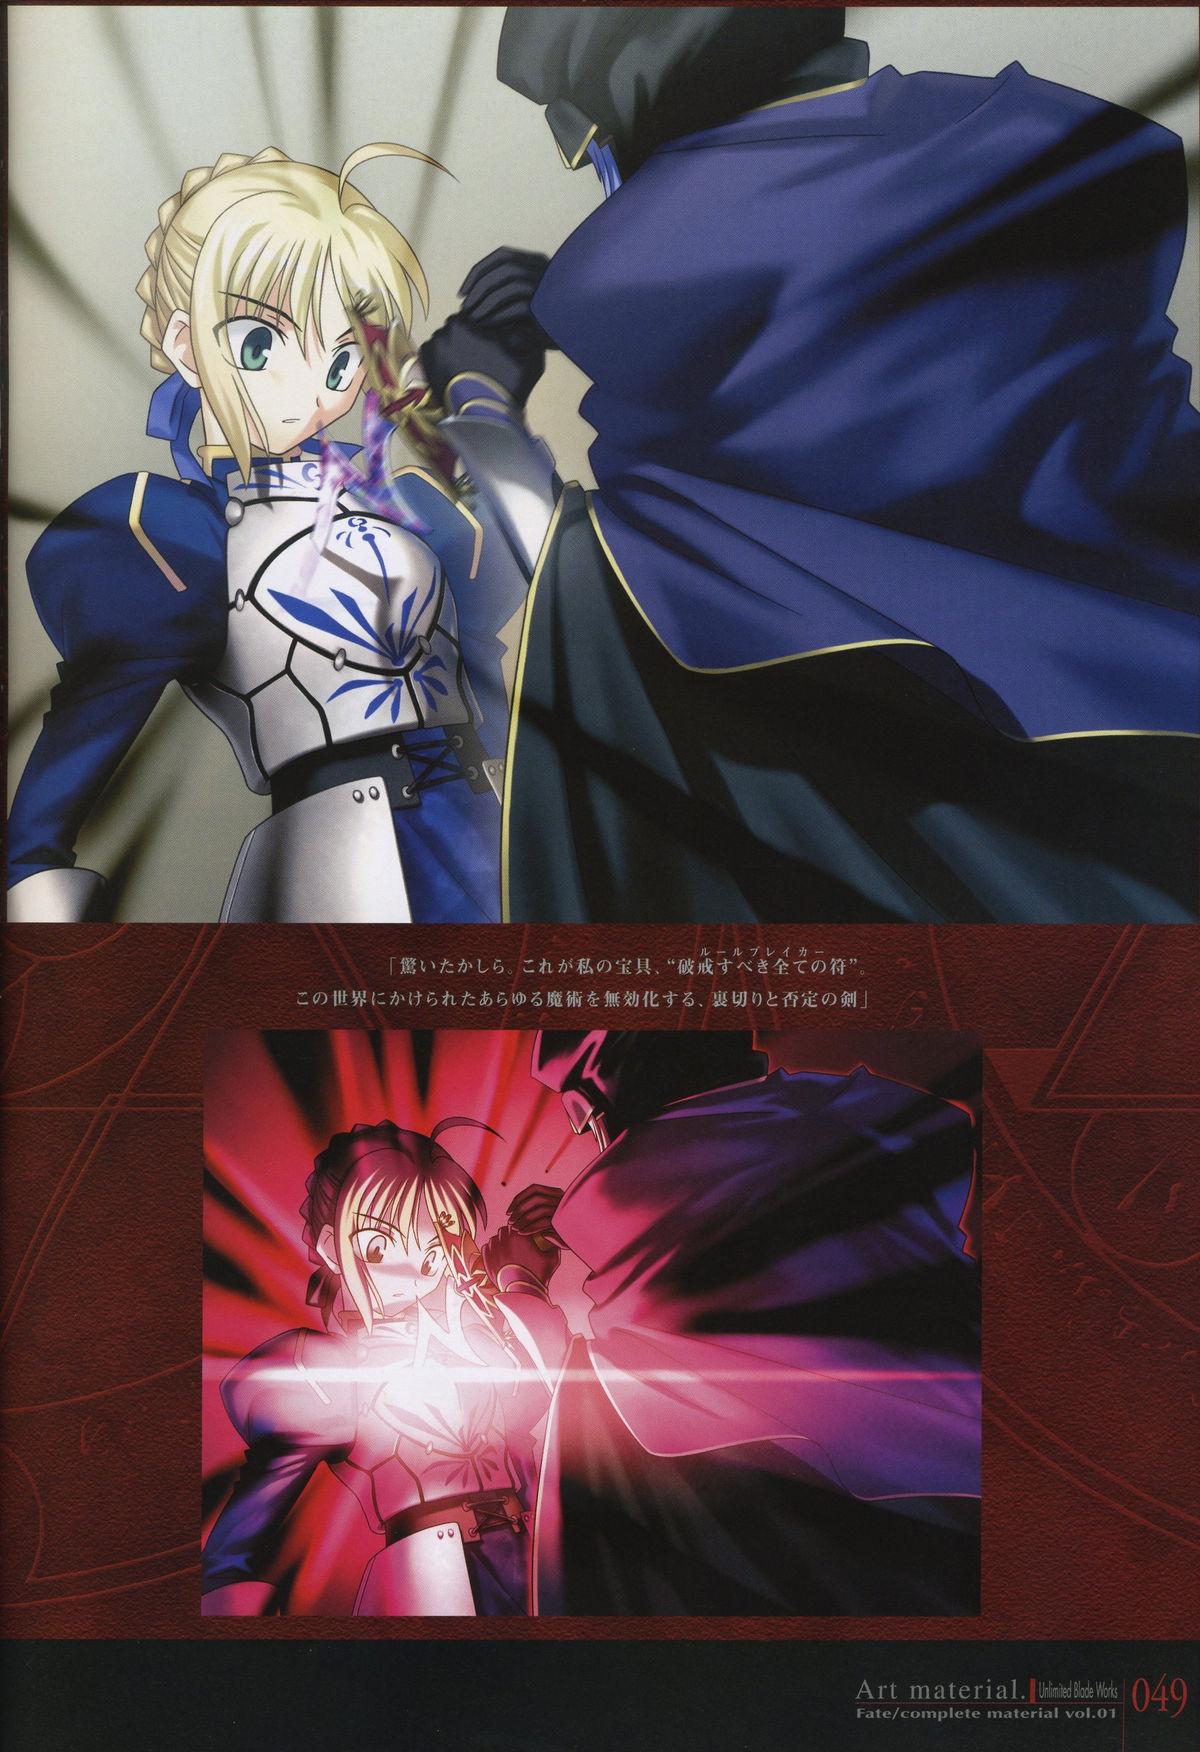 Fate/complete material I - Art material. 53